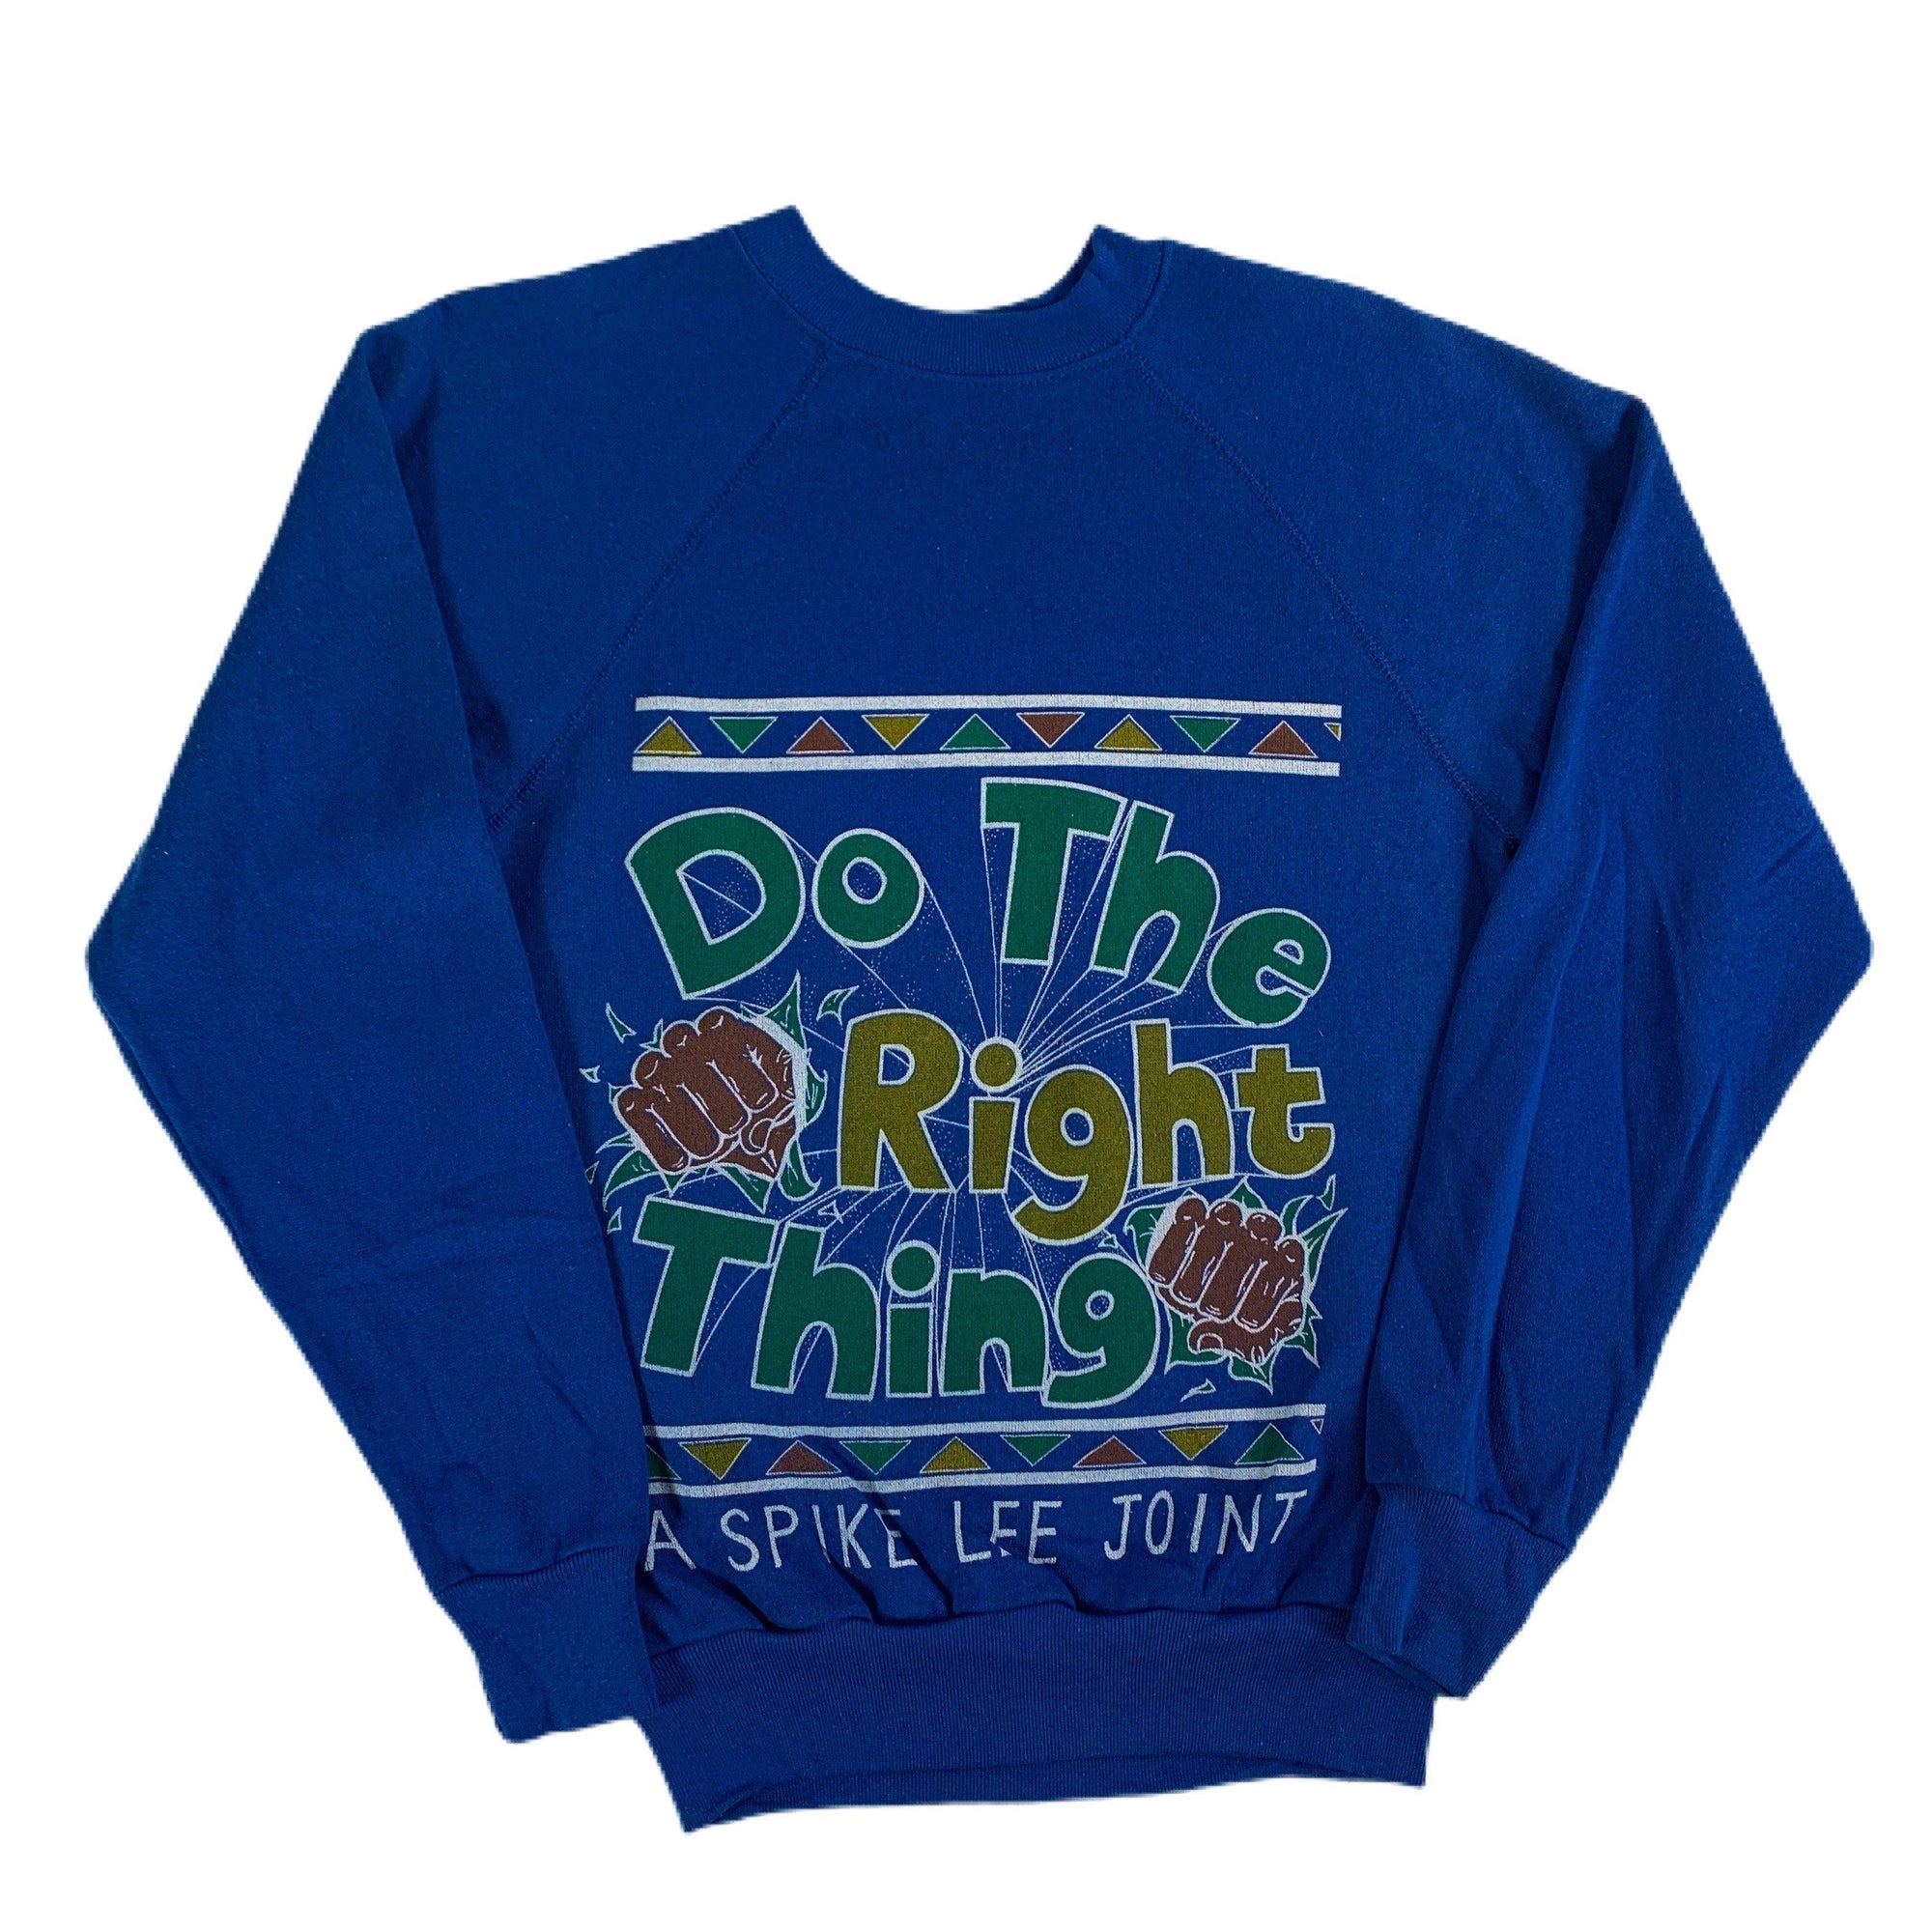 Vintage Do The Right Thing "A Spike Lee Joint" Crewneck Sweatshirt - jointcustodydc